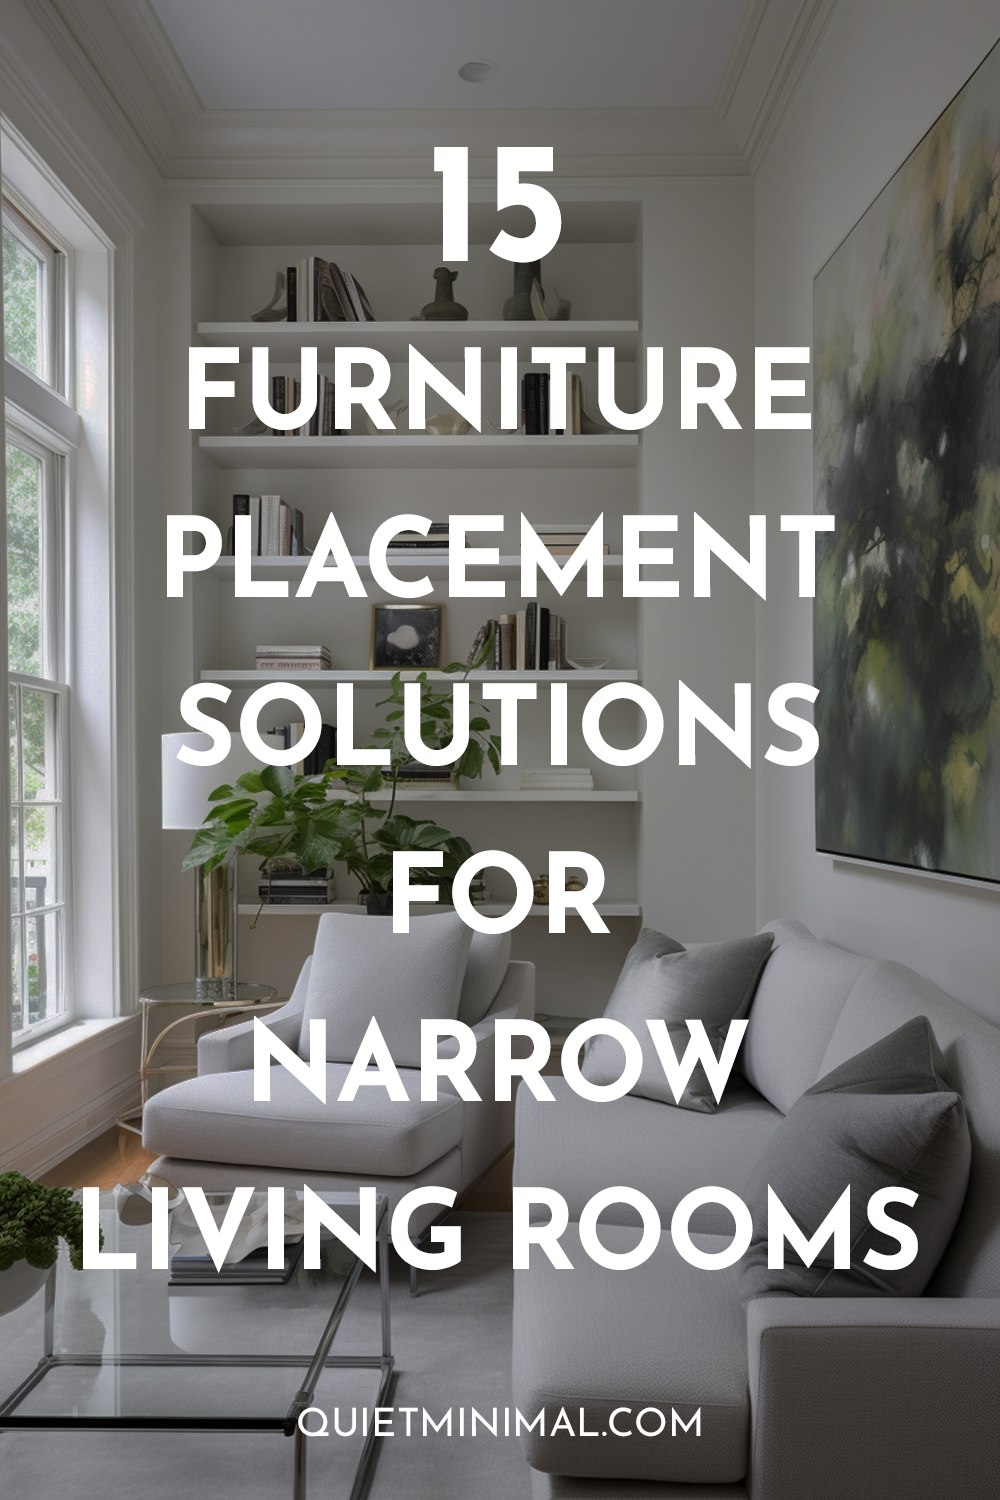 Discover 15 furniture placement solutions to optimize your narrow living room space.